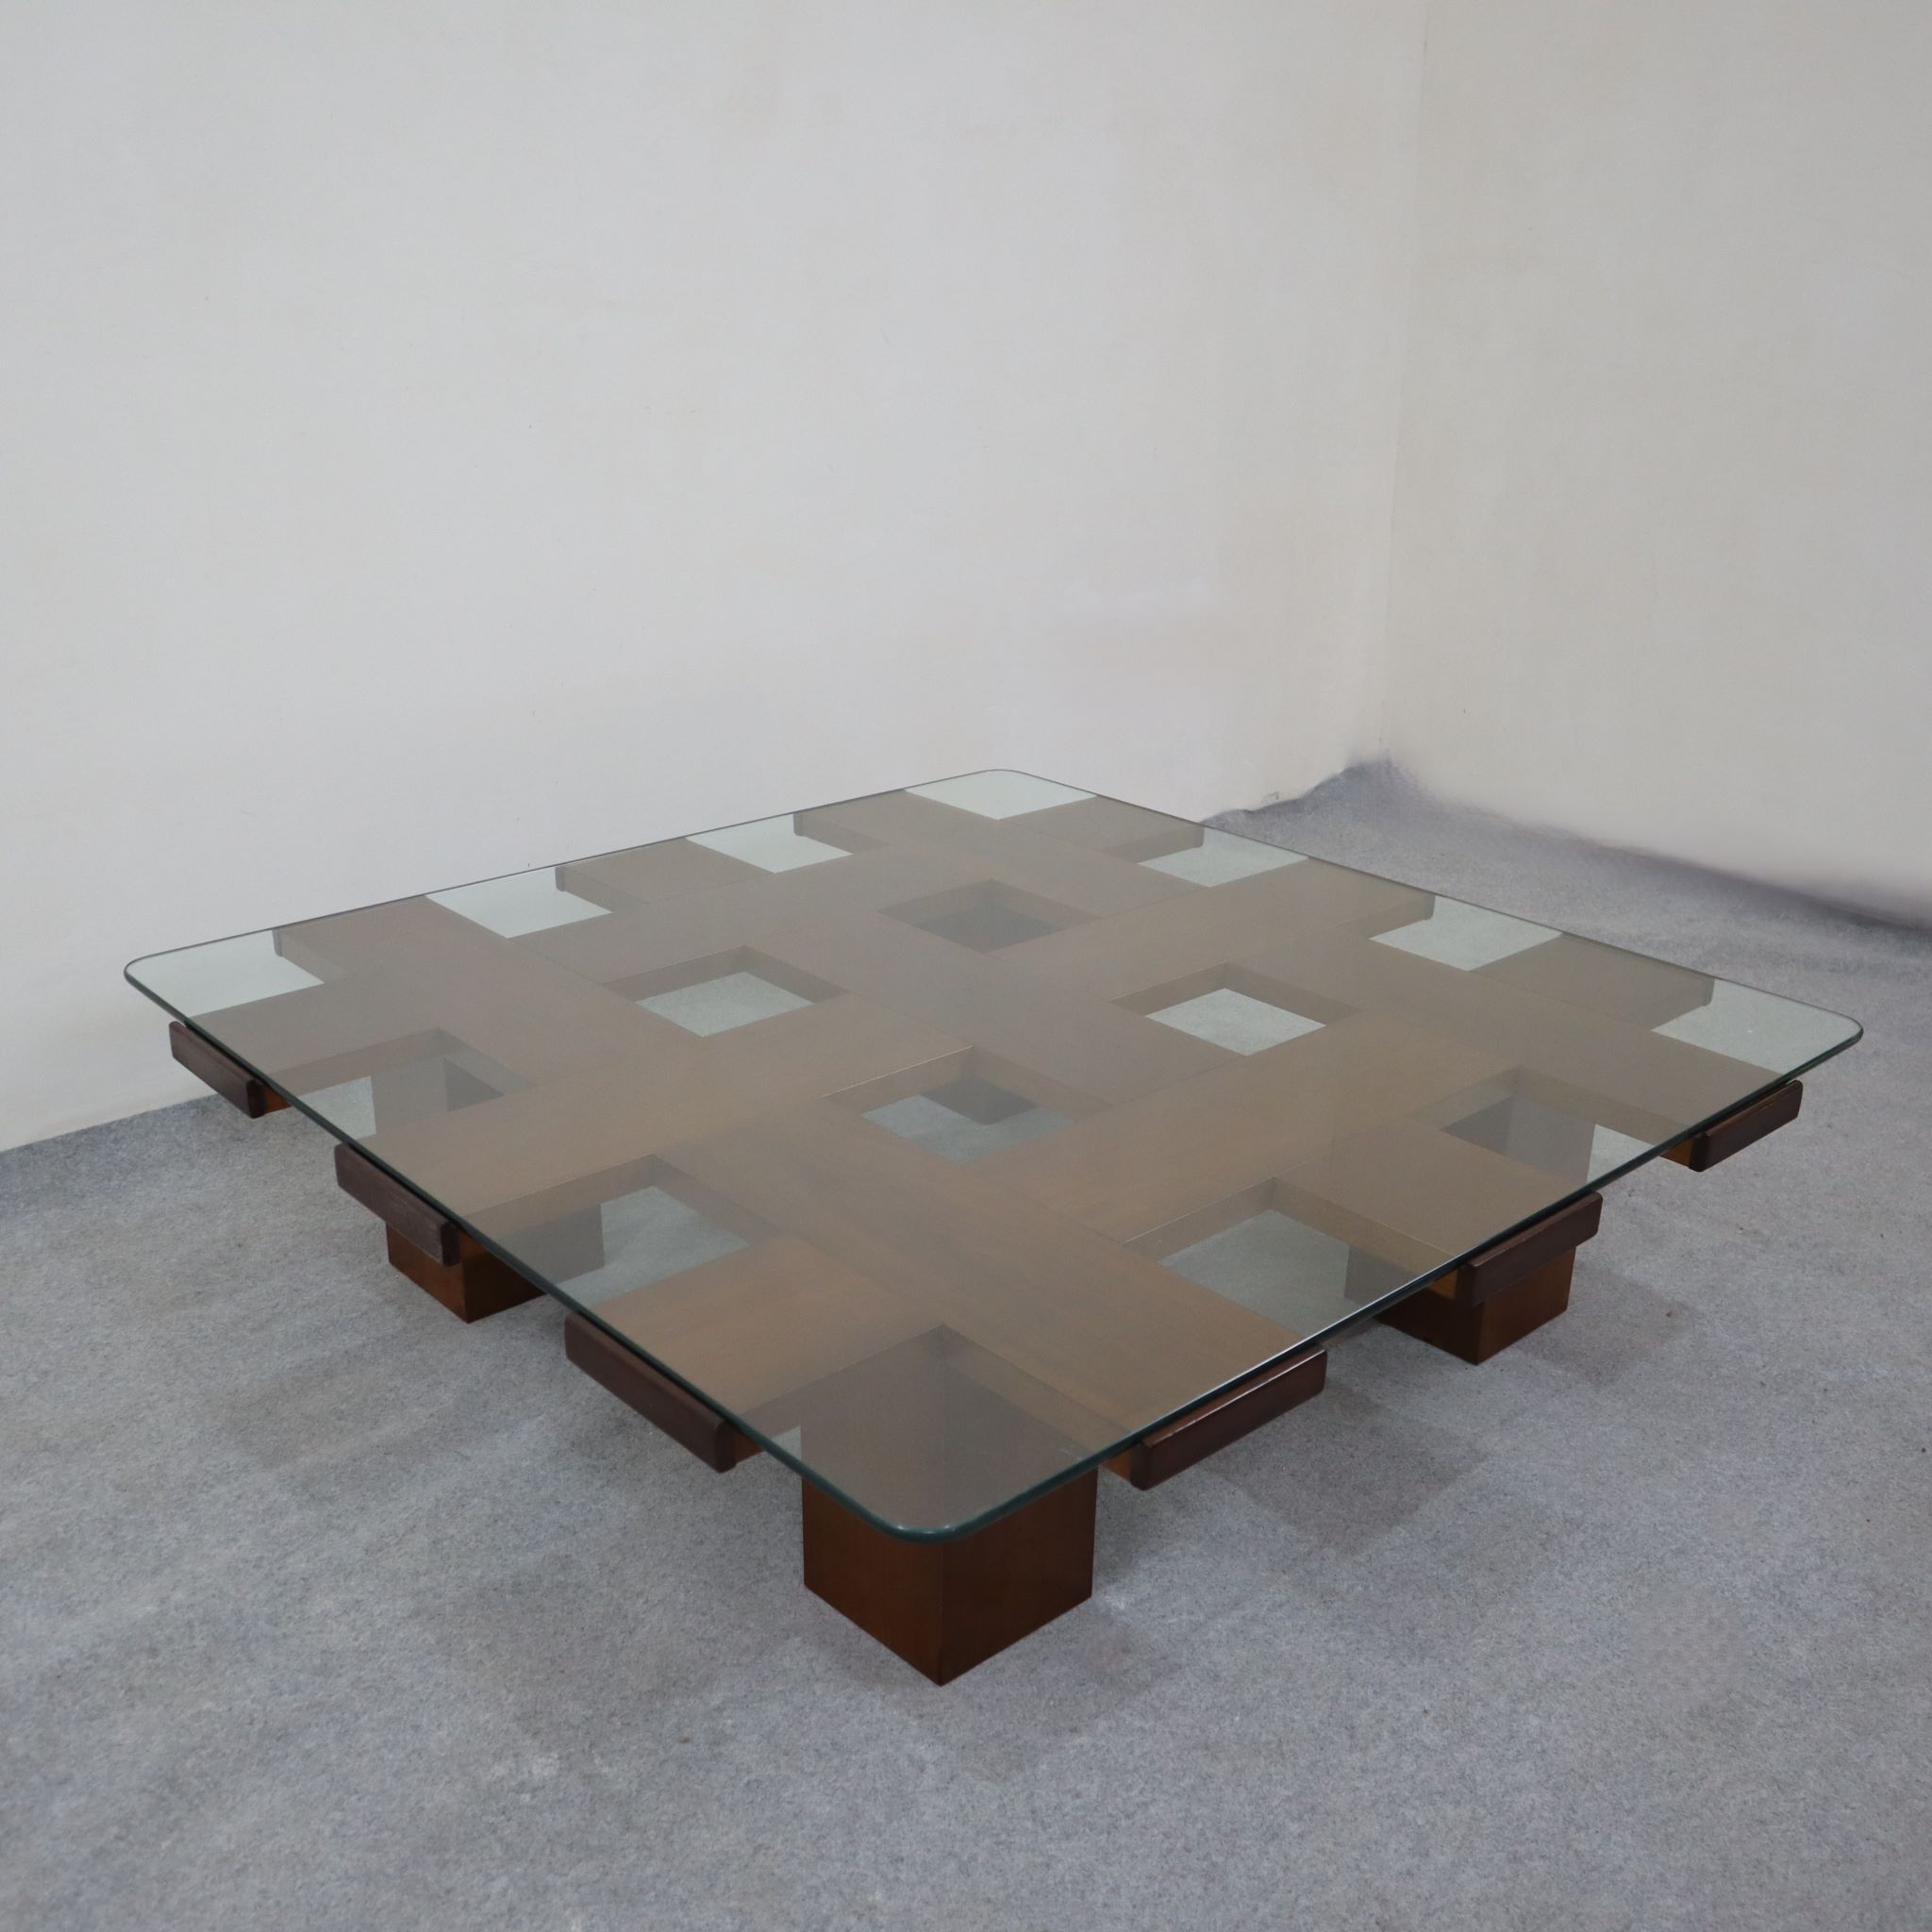 square-coffee-table-1970s-cherry-wood-crystal-bernini-style-high-viewvisionidepoca